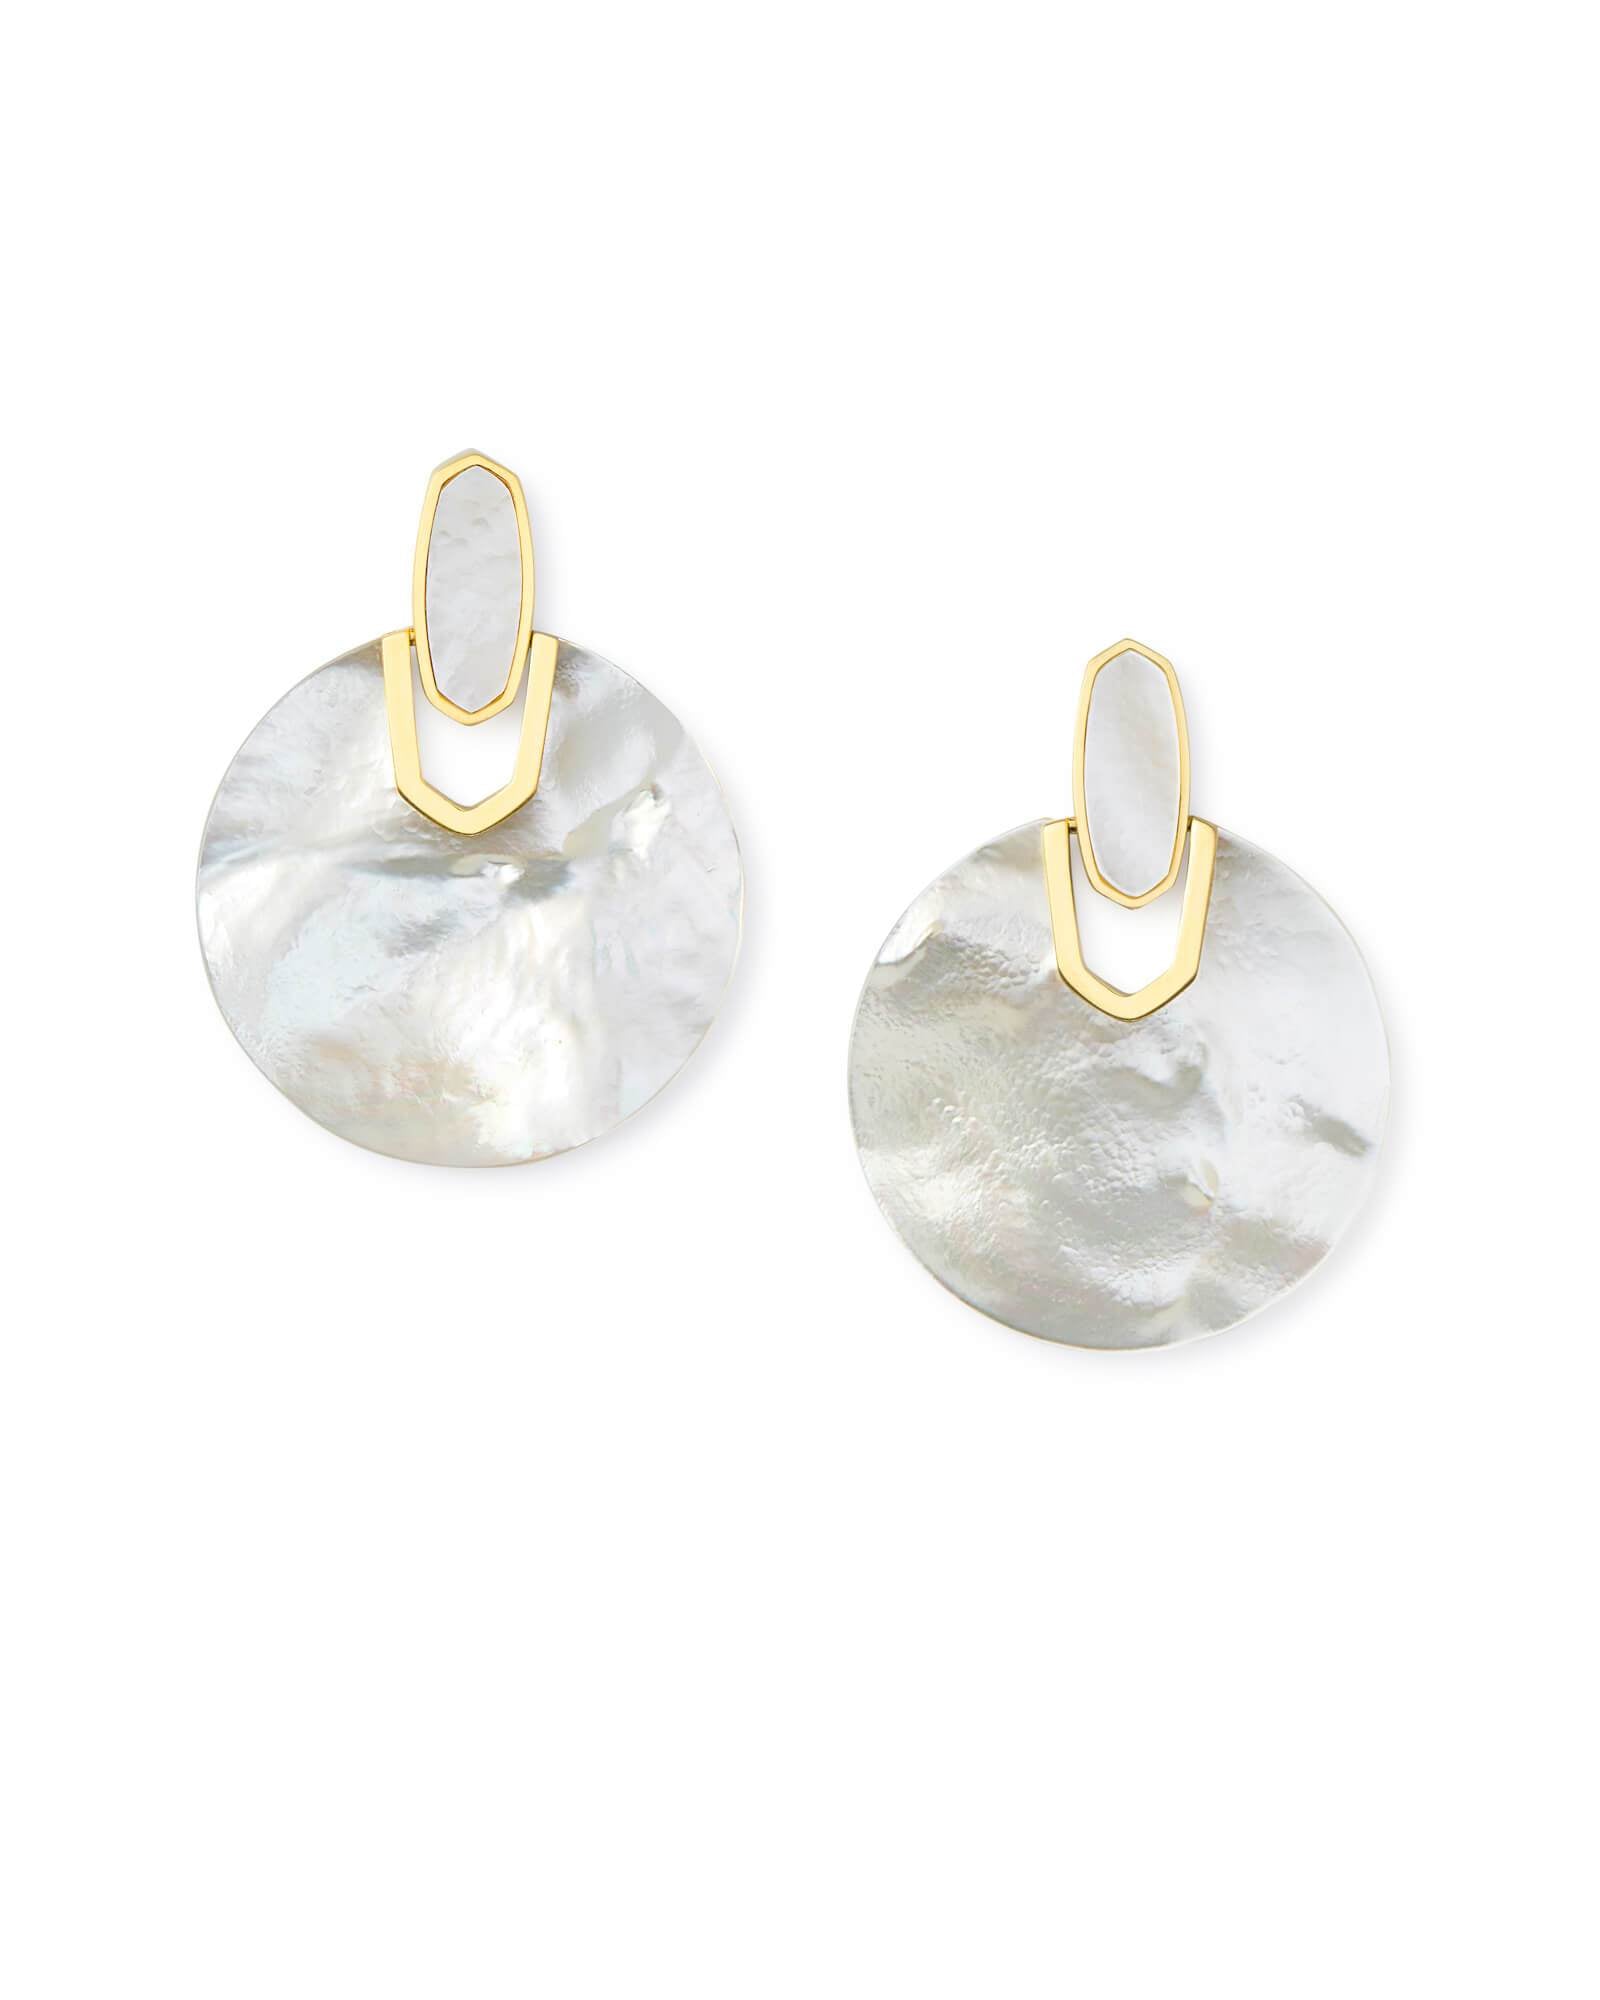 Didi Gold Statement Earrings In Ivory Pearl